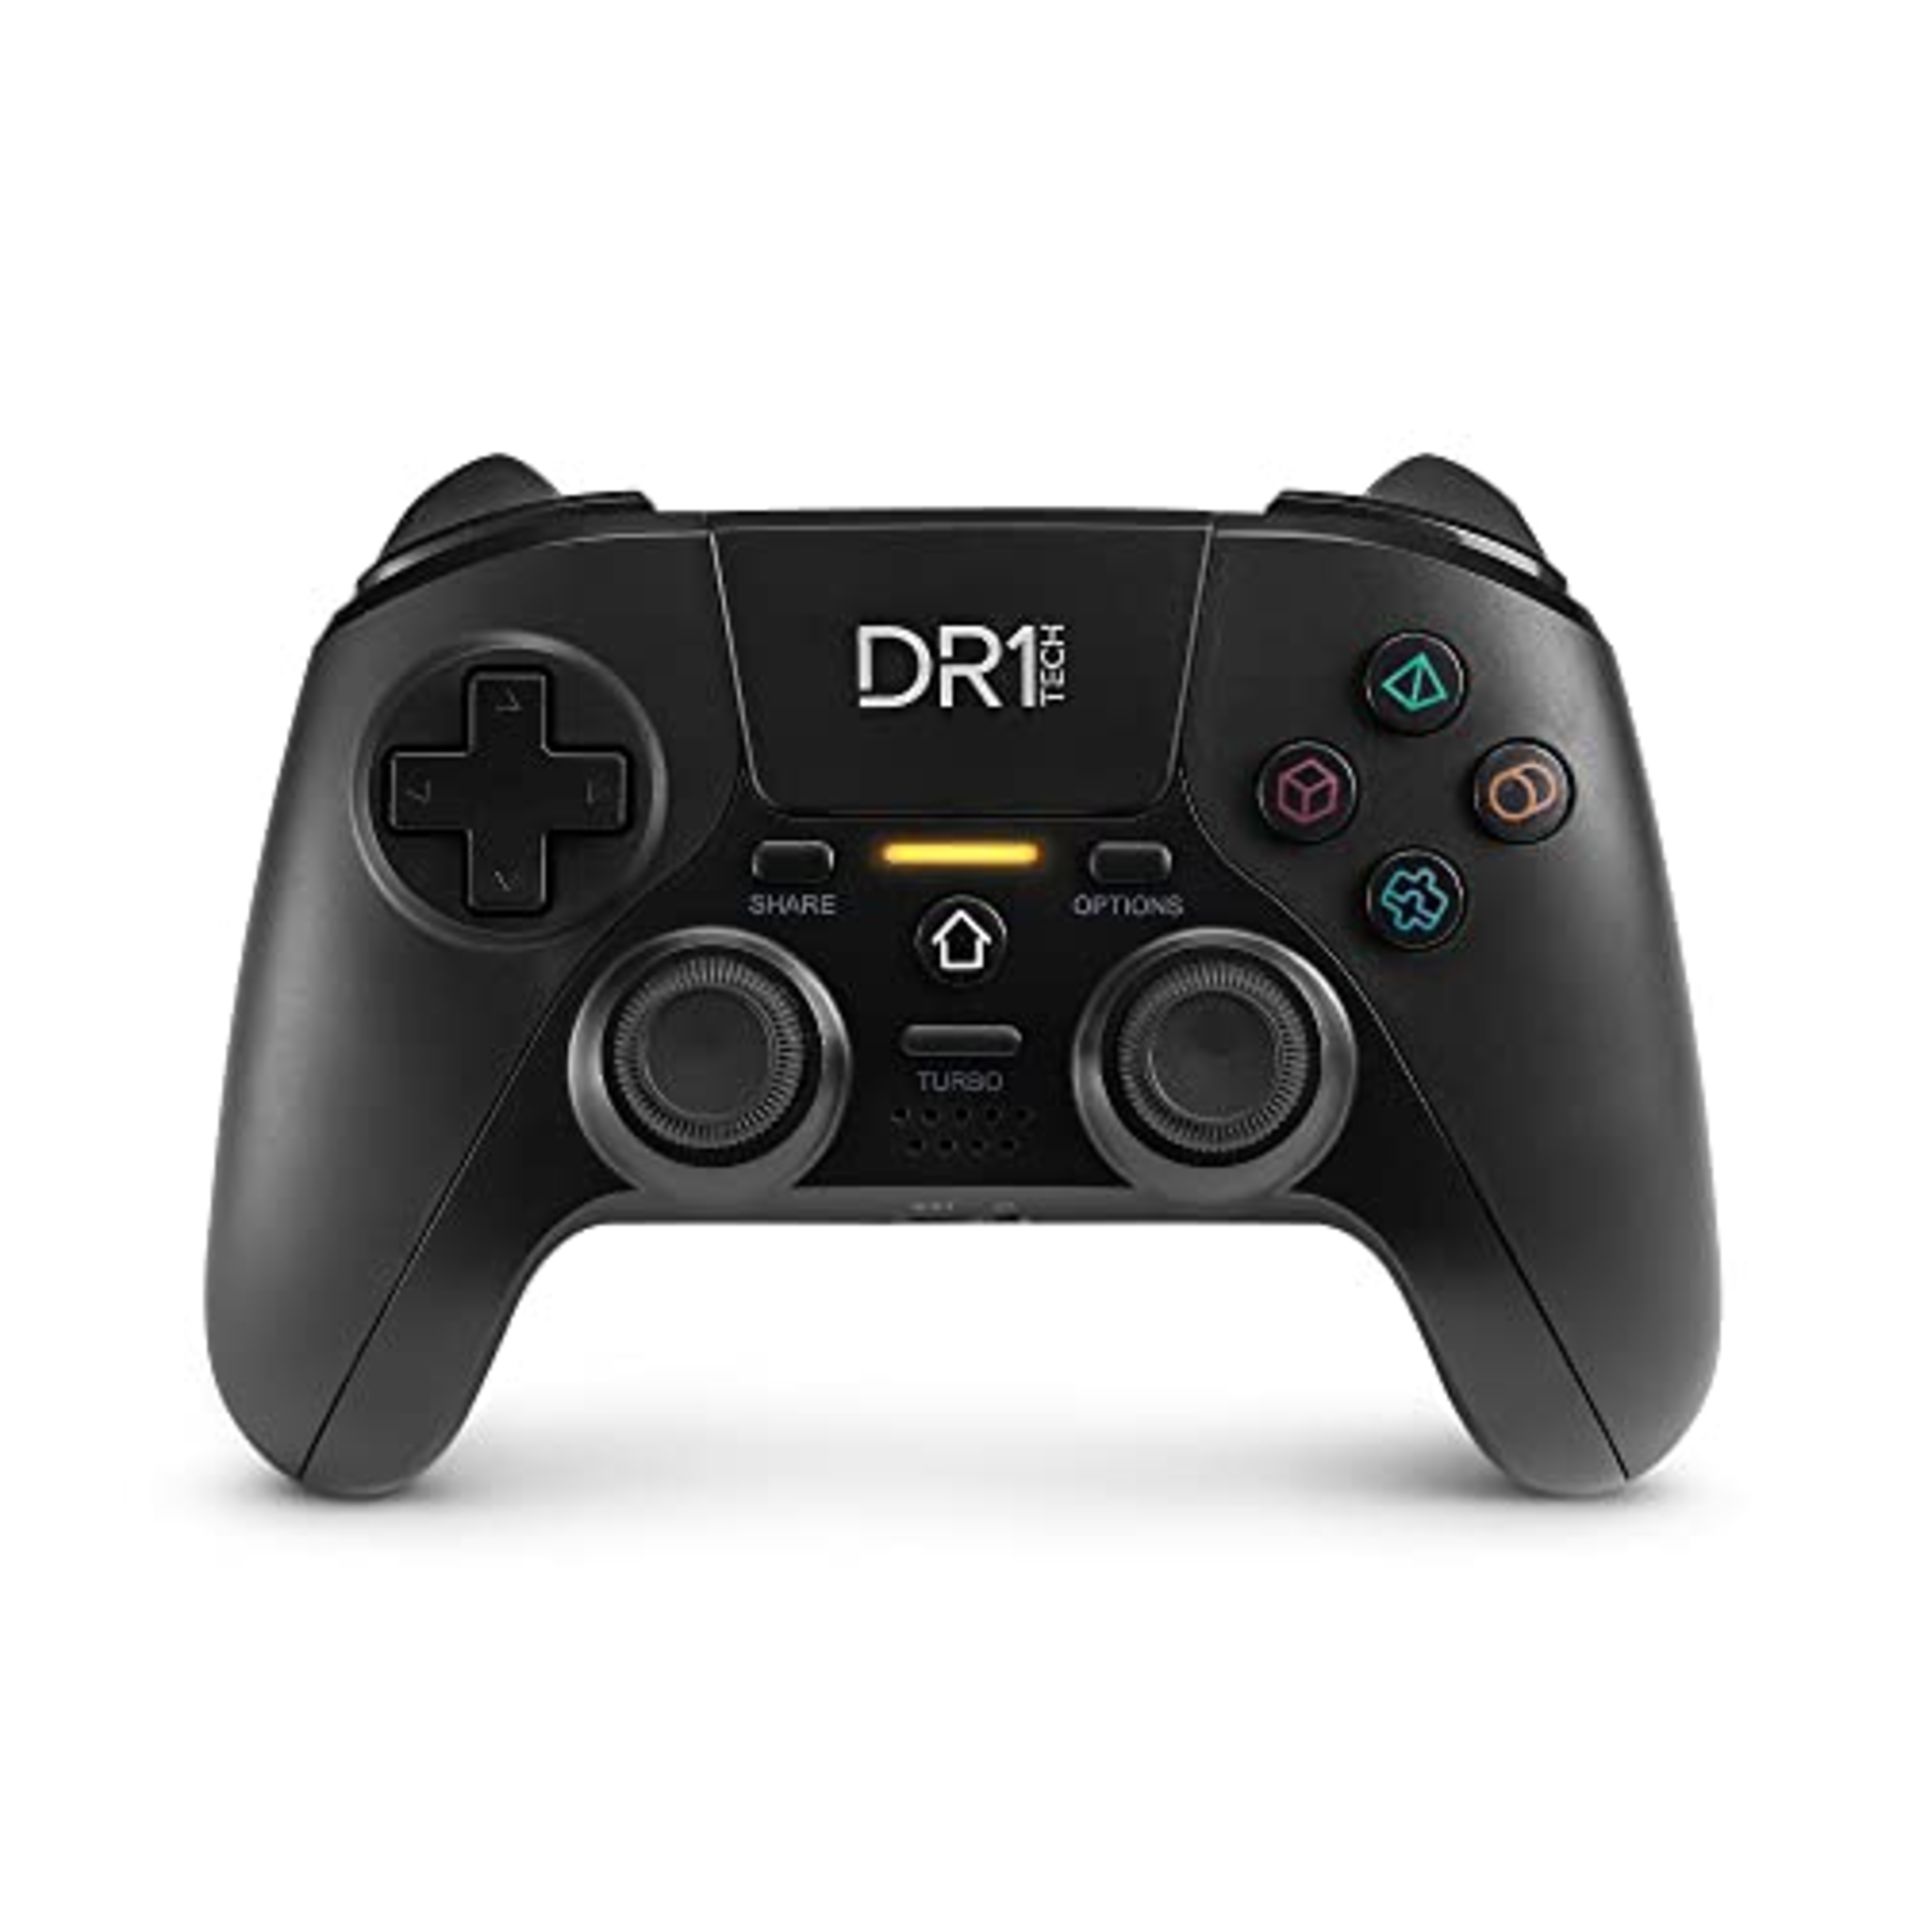 DR1TECH ShockPad II Wireless Controller for PS4 / PS3 - Gaming Controller NEXT-GEN DES - Image 4 of 6